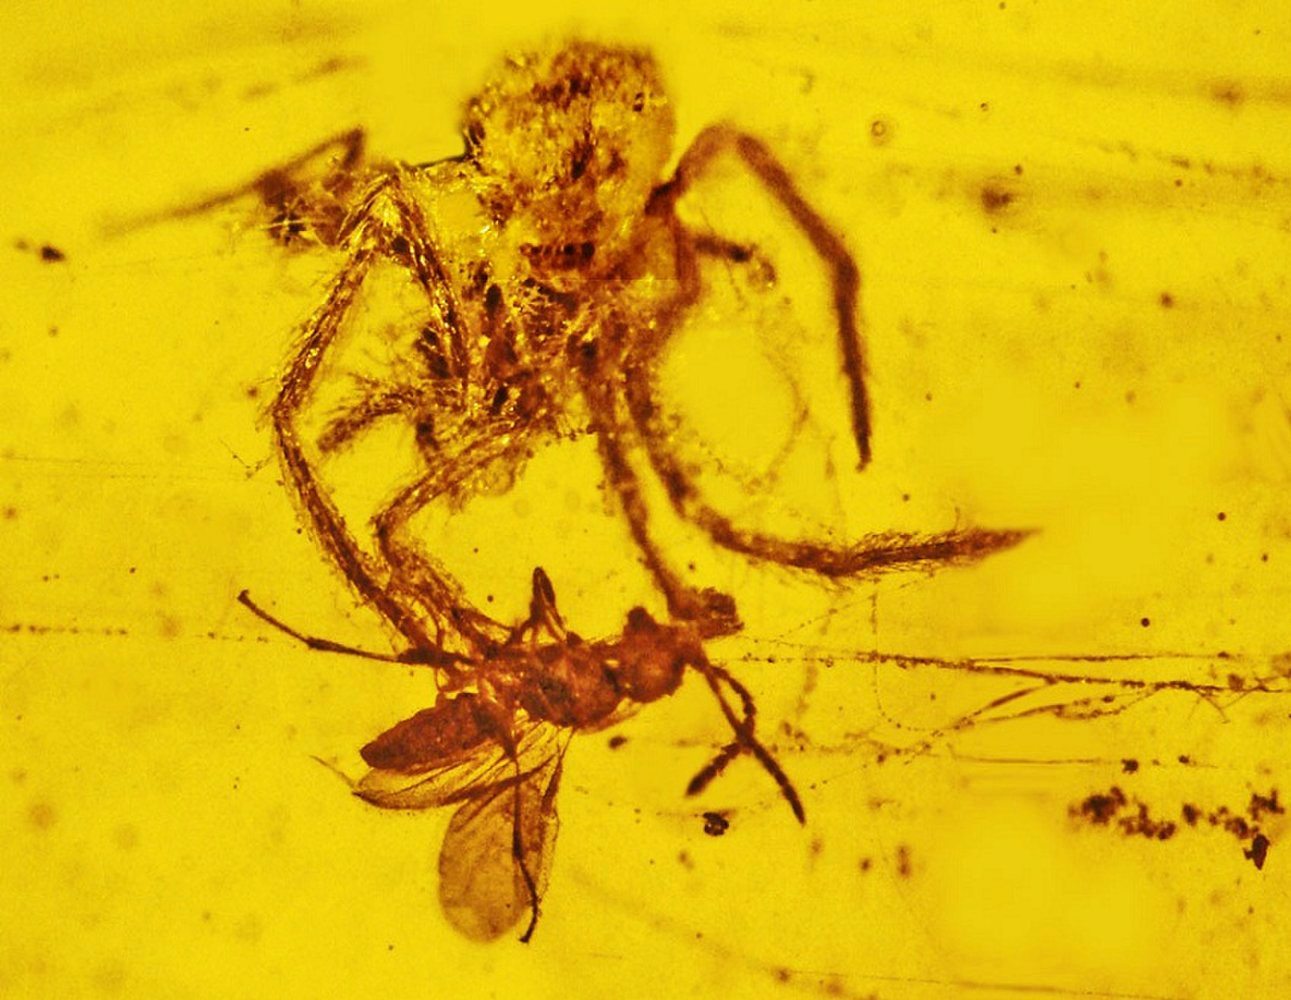 the_100-million-year-old_spider_attack_captured_in_amber.jpg